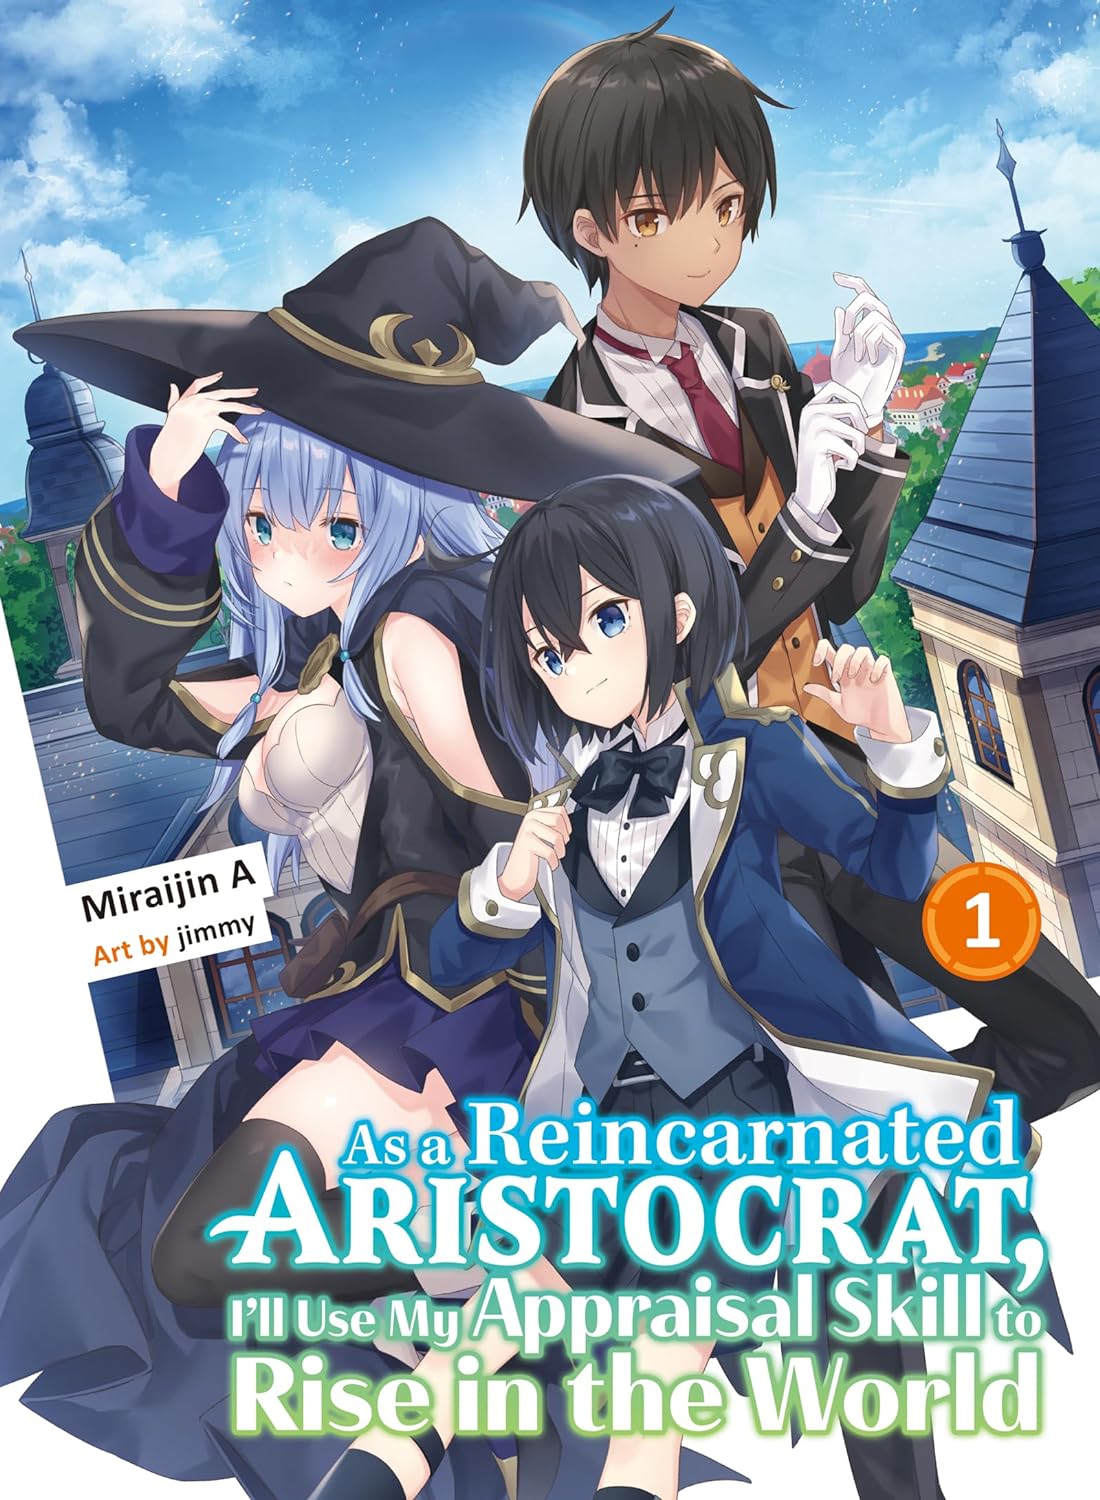 As a Reincarnated Aristocrat, I’ll Use My Appraisal Skill to Rise in the World Volume 1 (Light Novel) Review